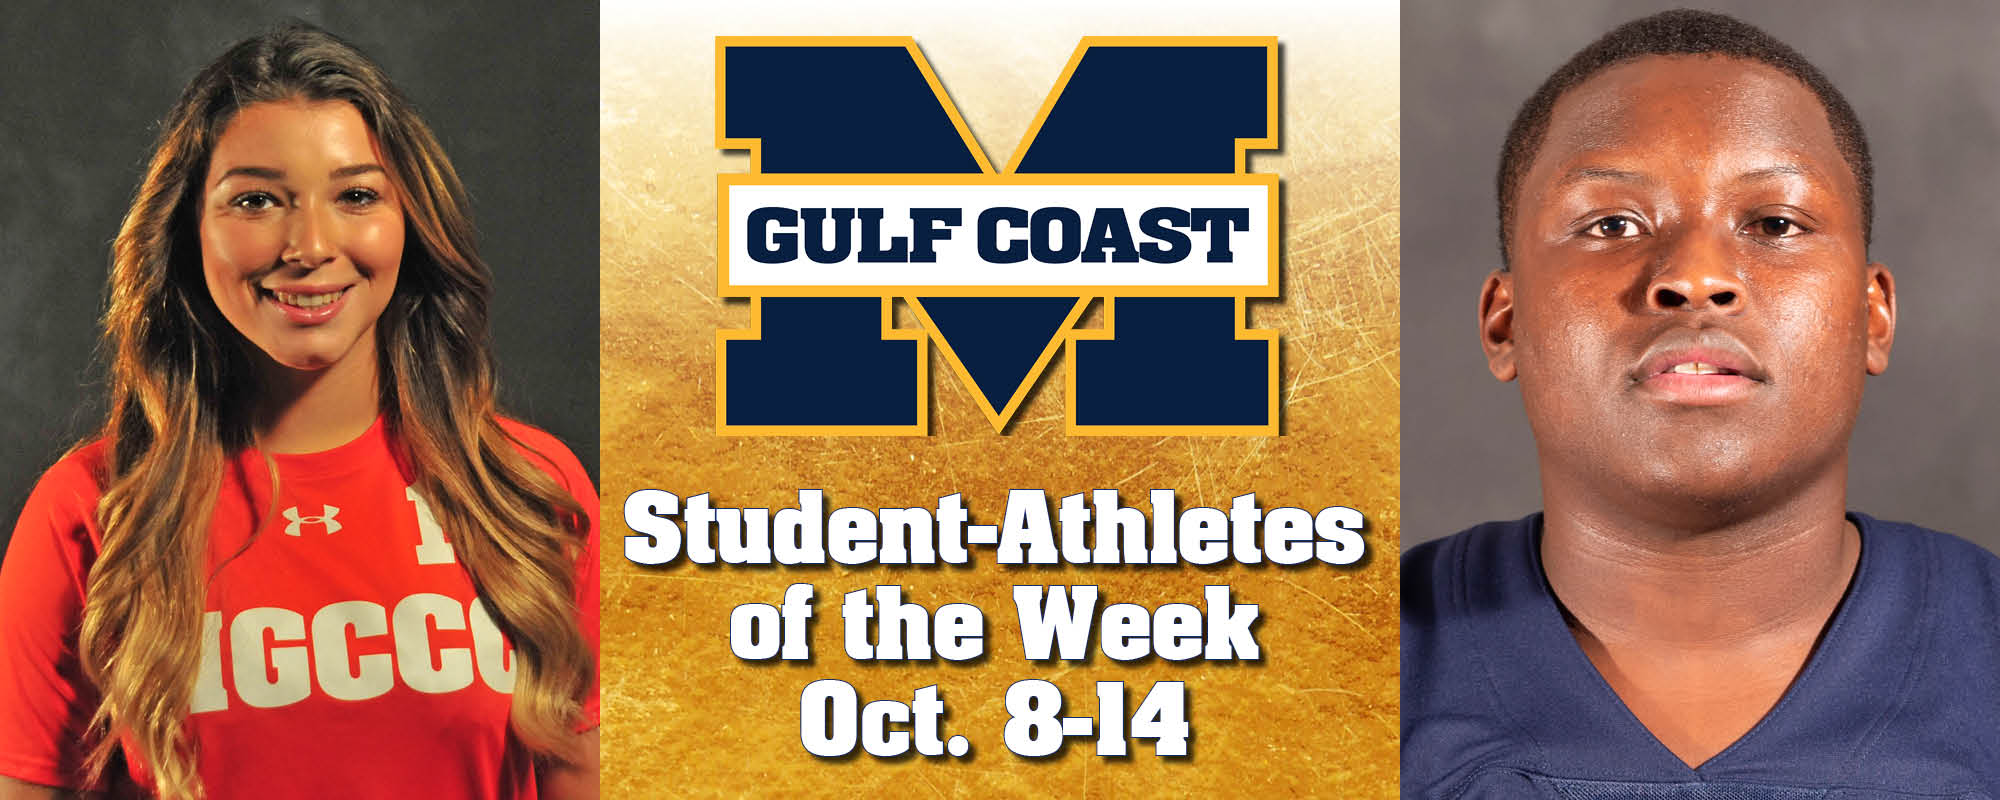 Lott, Carter named MGCCC Student-Athletes of the Week